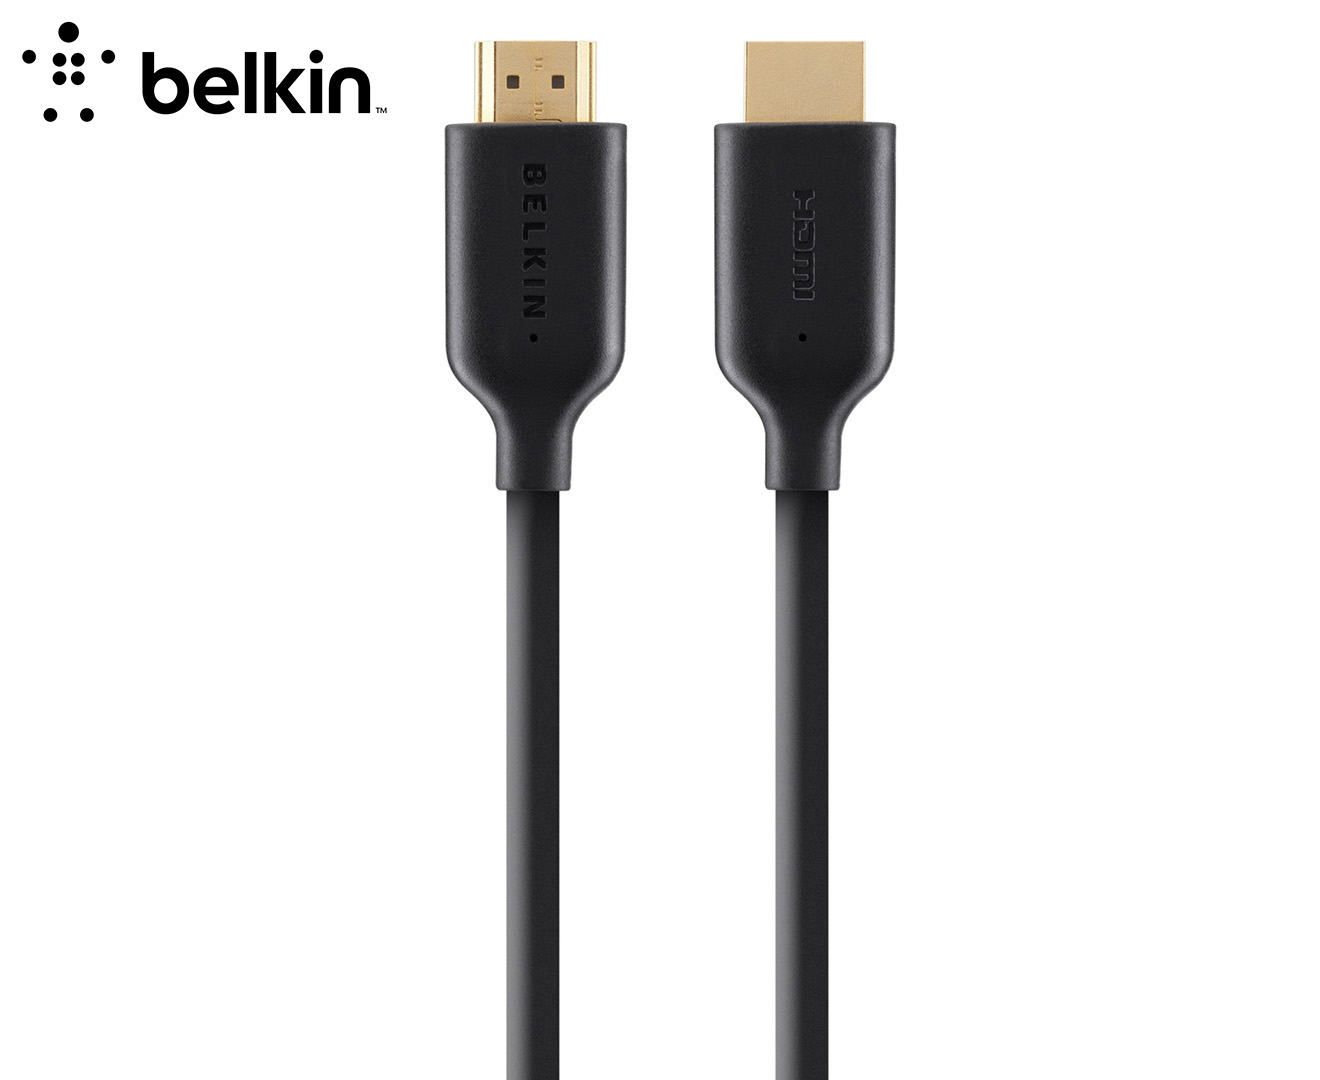 Belkin Essential Series 5M High-Speed HDMI Cable w/ Ethernet - Black